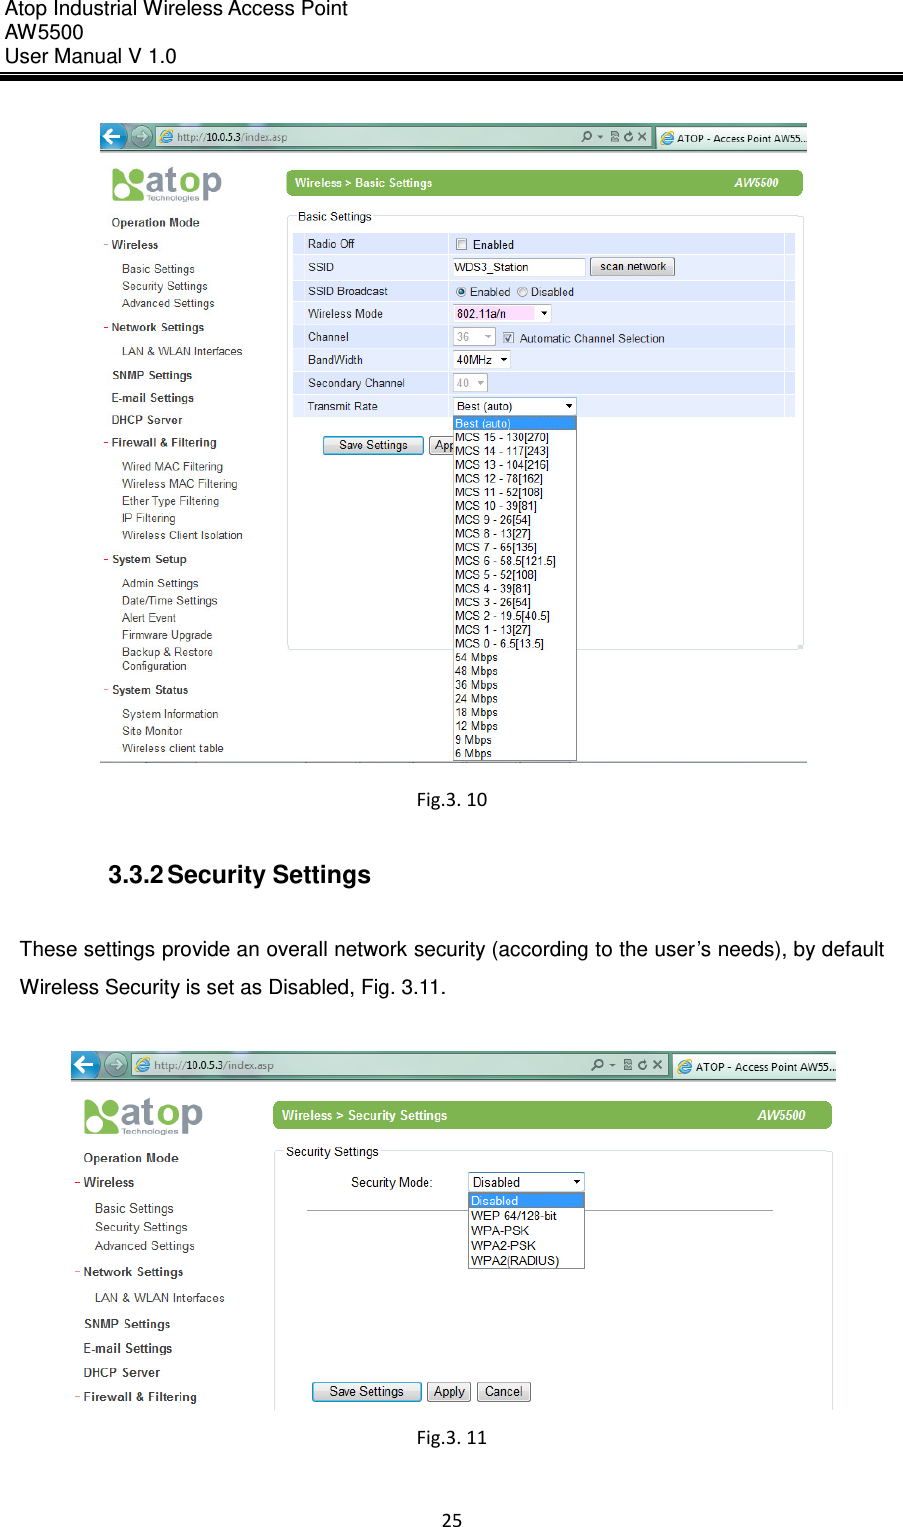 Atop Industrial Wireless Access Point AW 5500 User Manual V 1.0                      25   Fig.3. 10  3.3.2 Security Settings  These settings provide an overall network security (according to the user’s needs), by default Wireless Security is set as Disabled, Fig. 3.11.     Fig.3. 11  